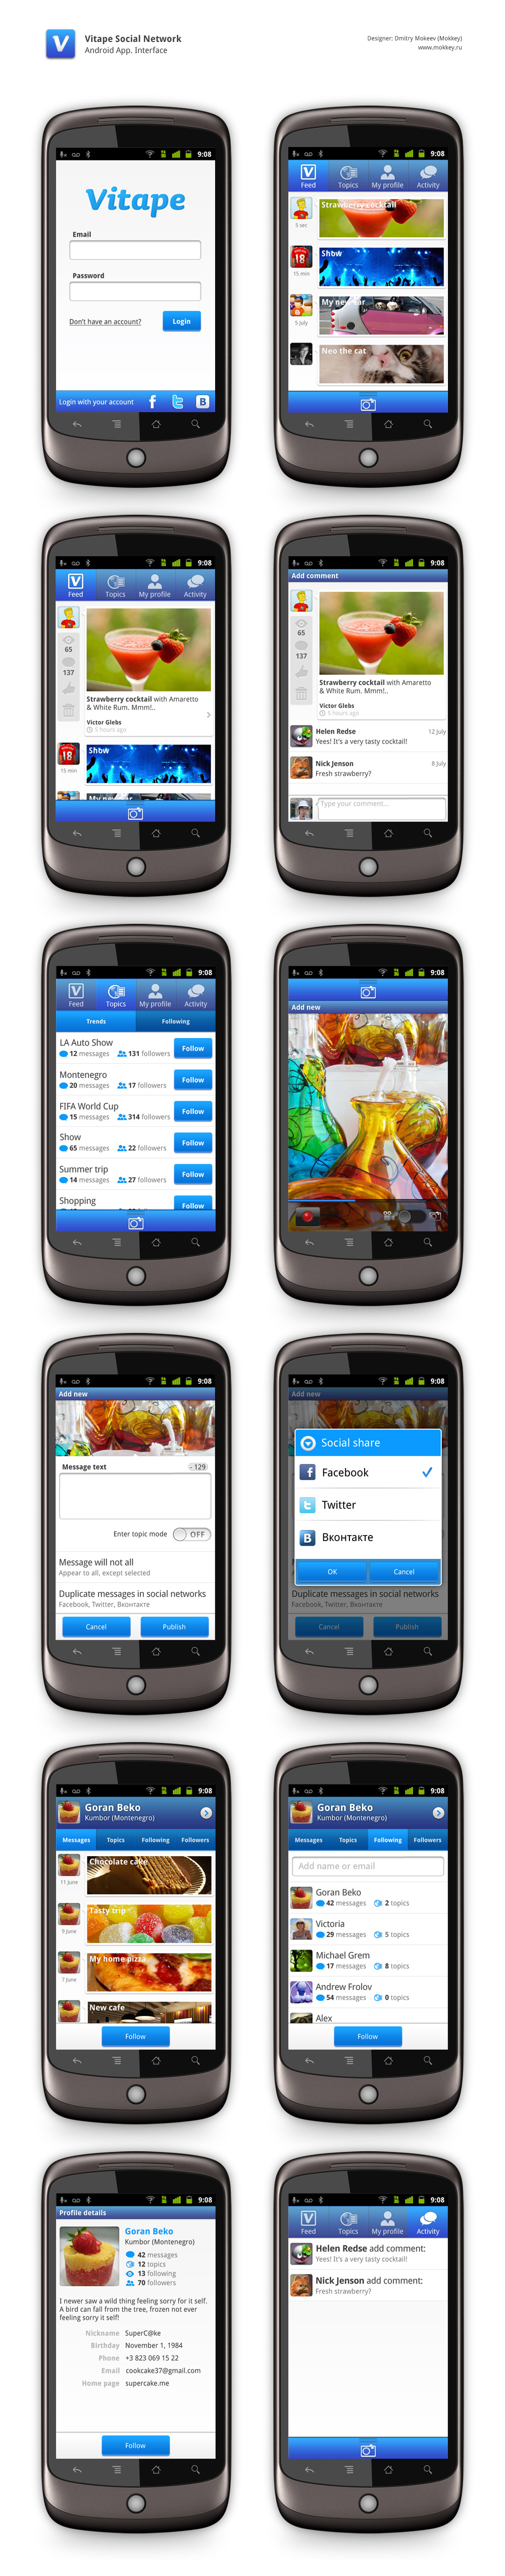 Vitape – Android